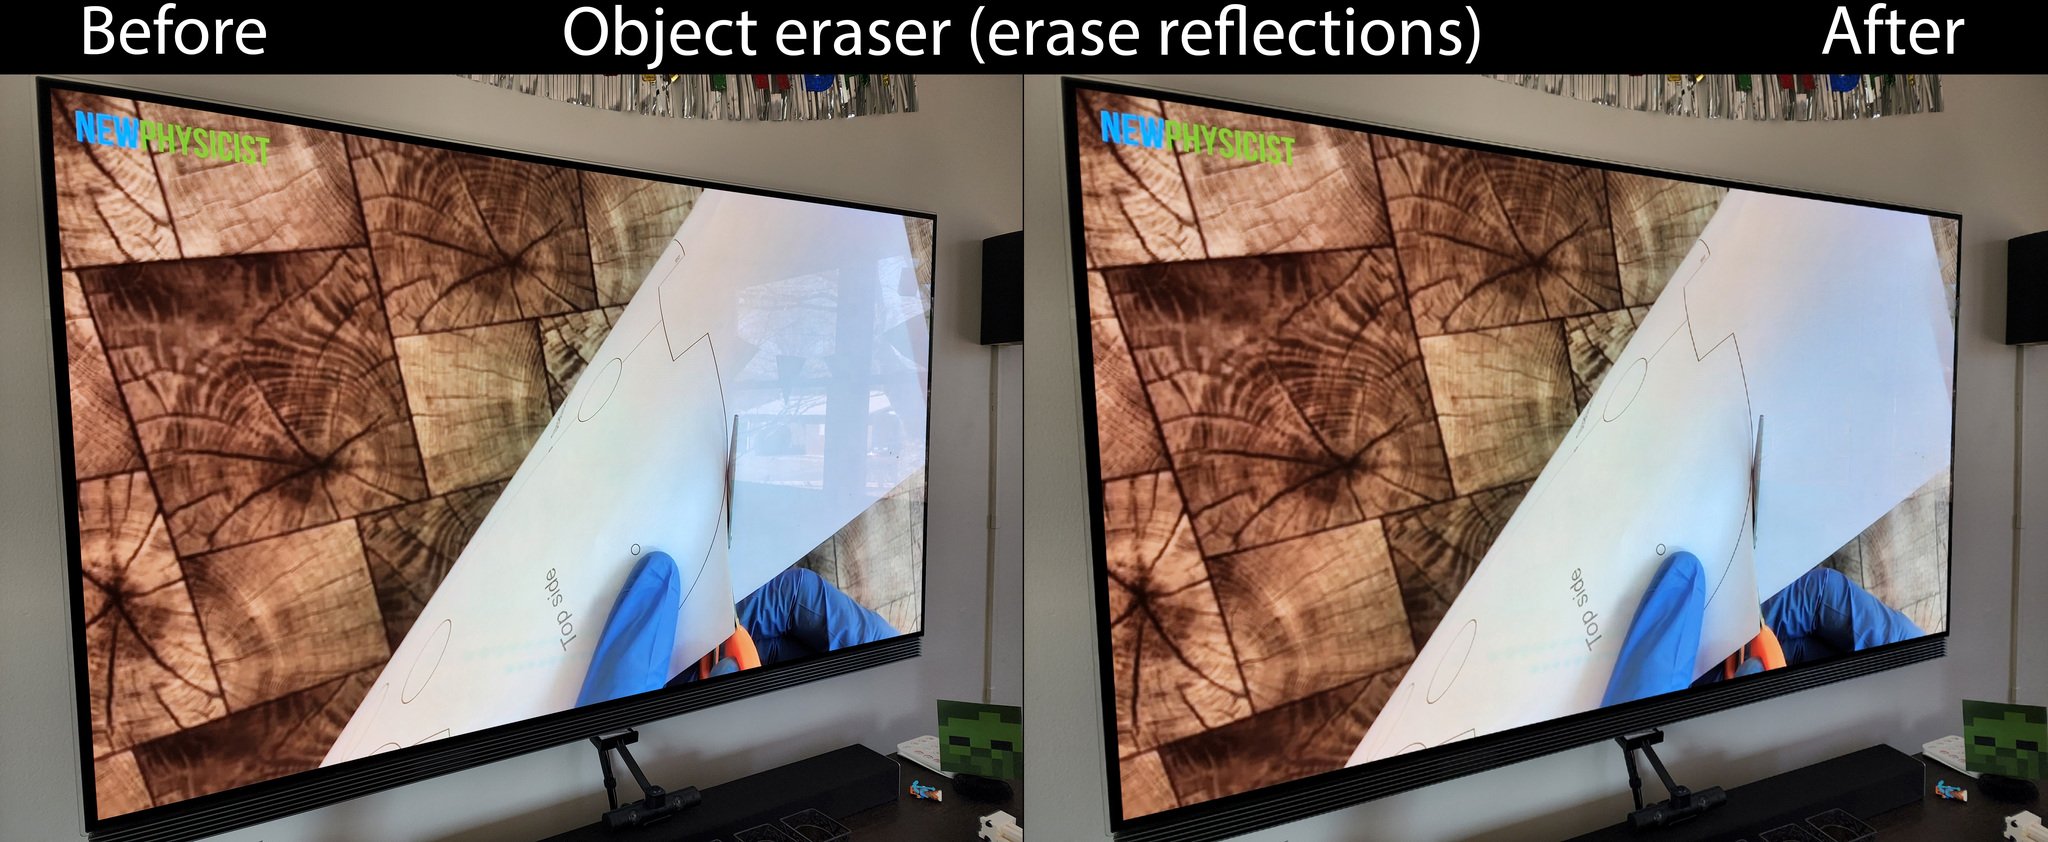 Samsung Object Eraser S22 Improvements Reflections